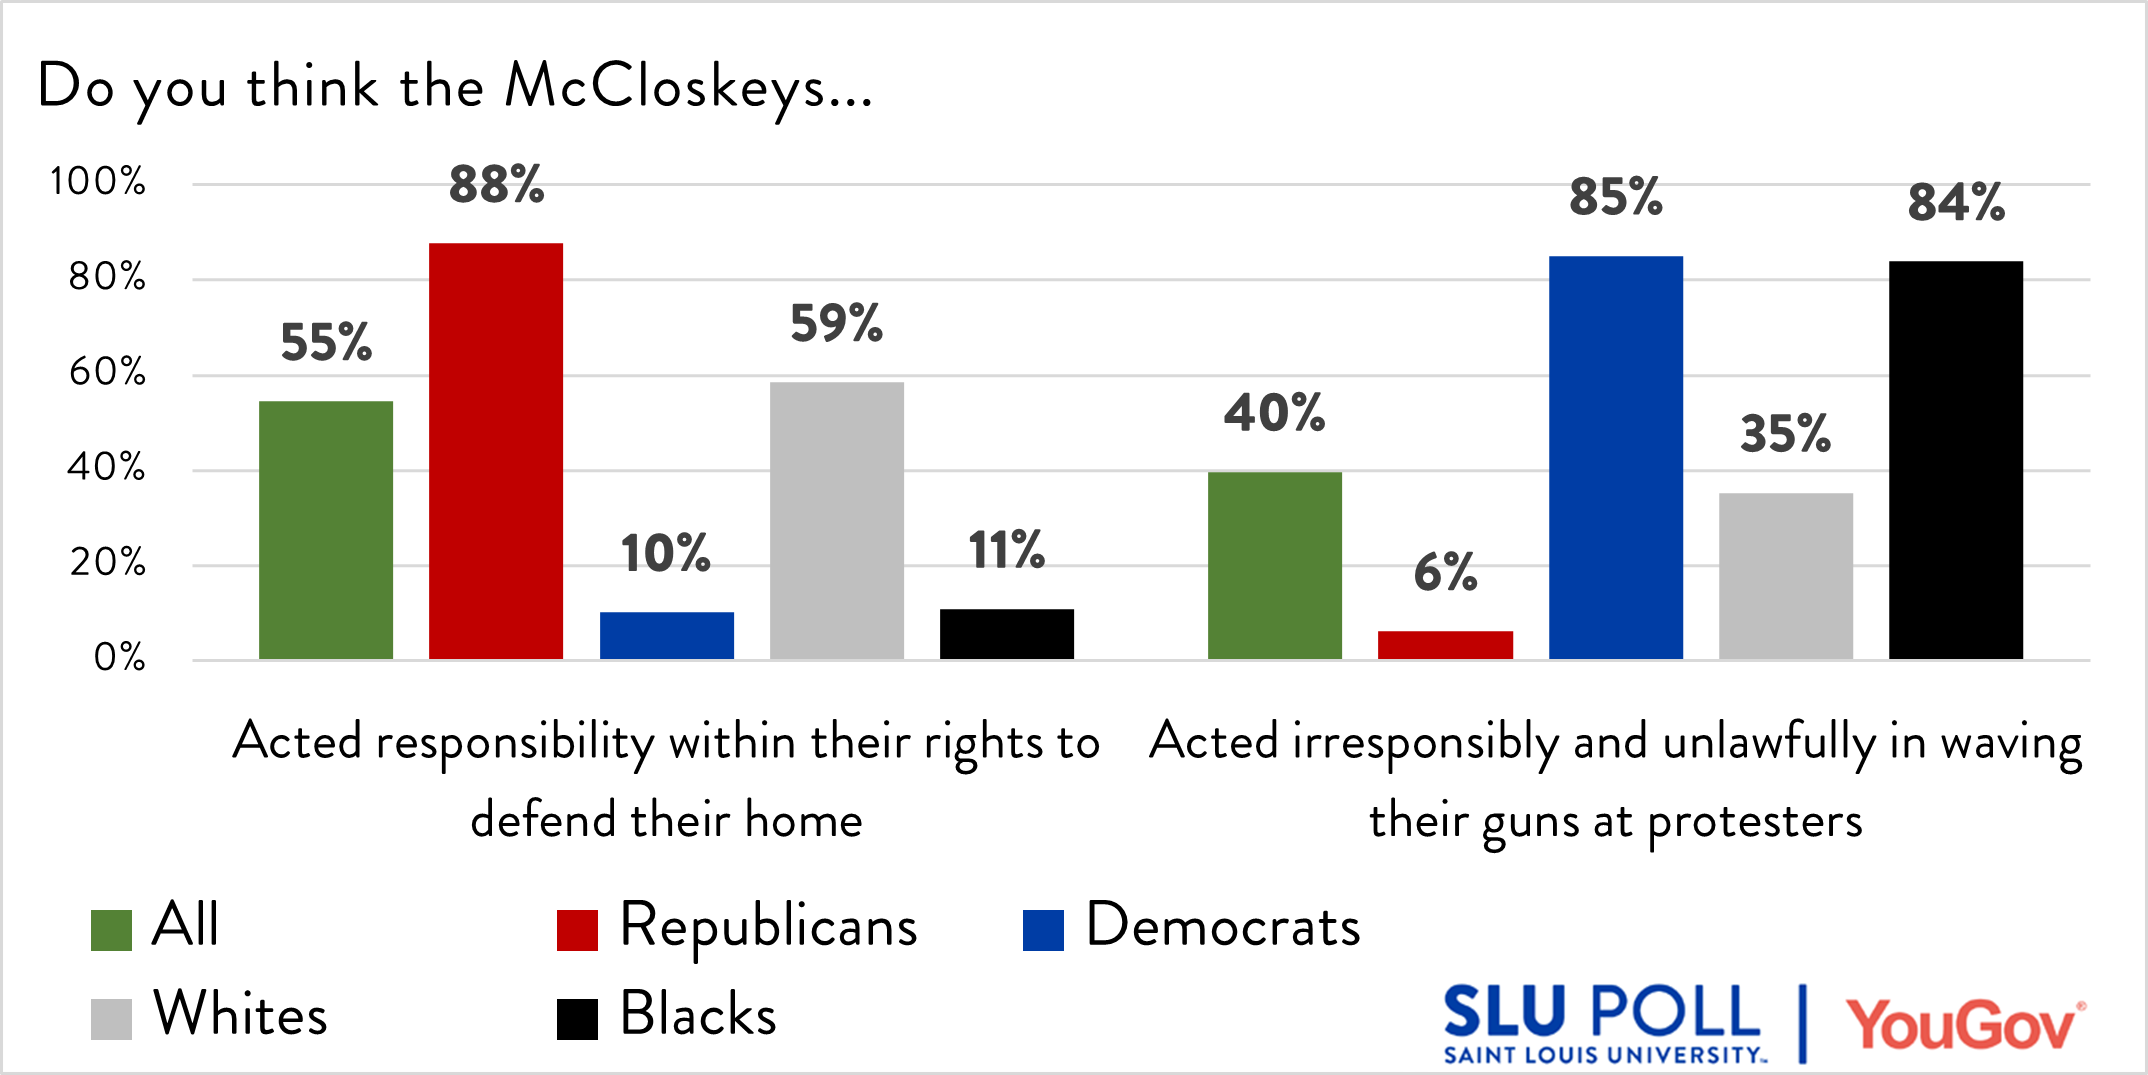 Most voters, Republicans and whites thought the McCloskey's actions were lawful, Democrats and Blacks do not